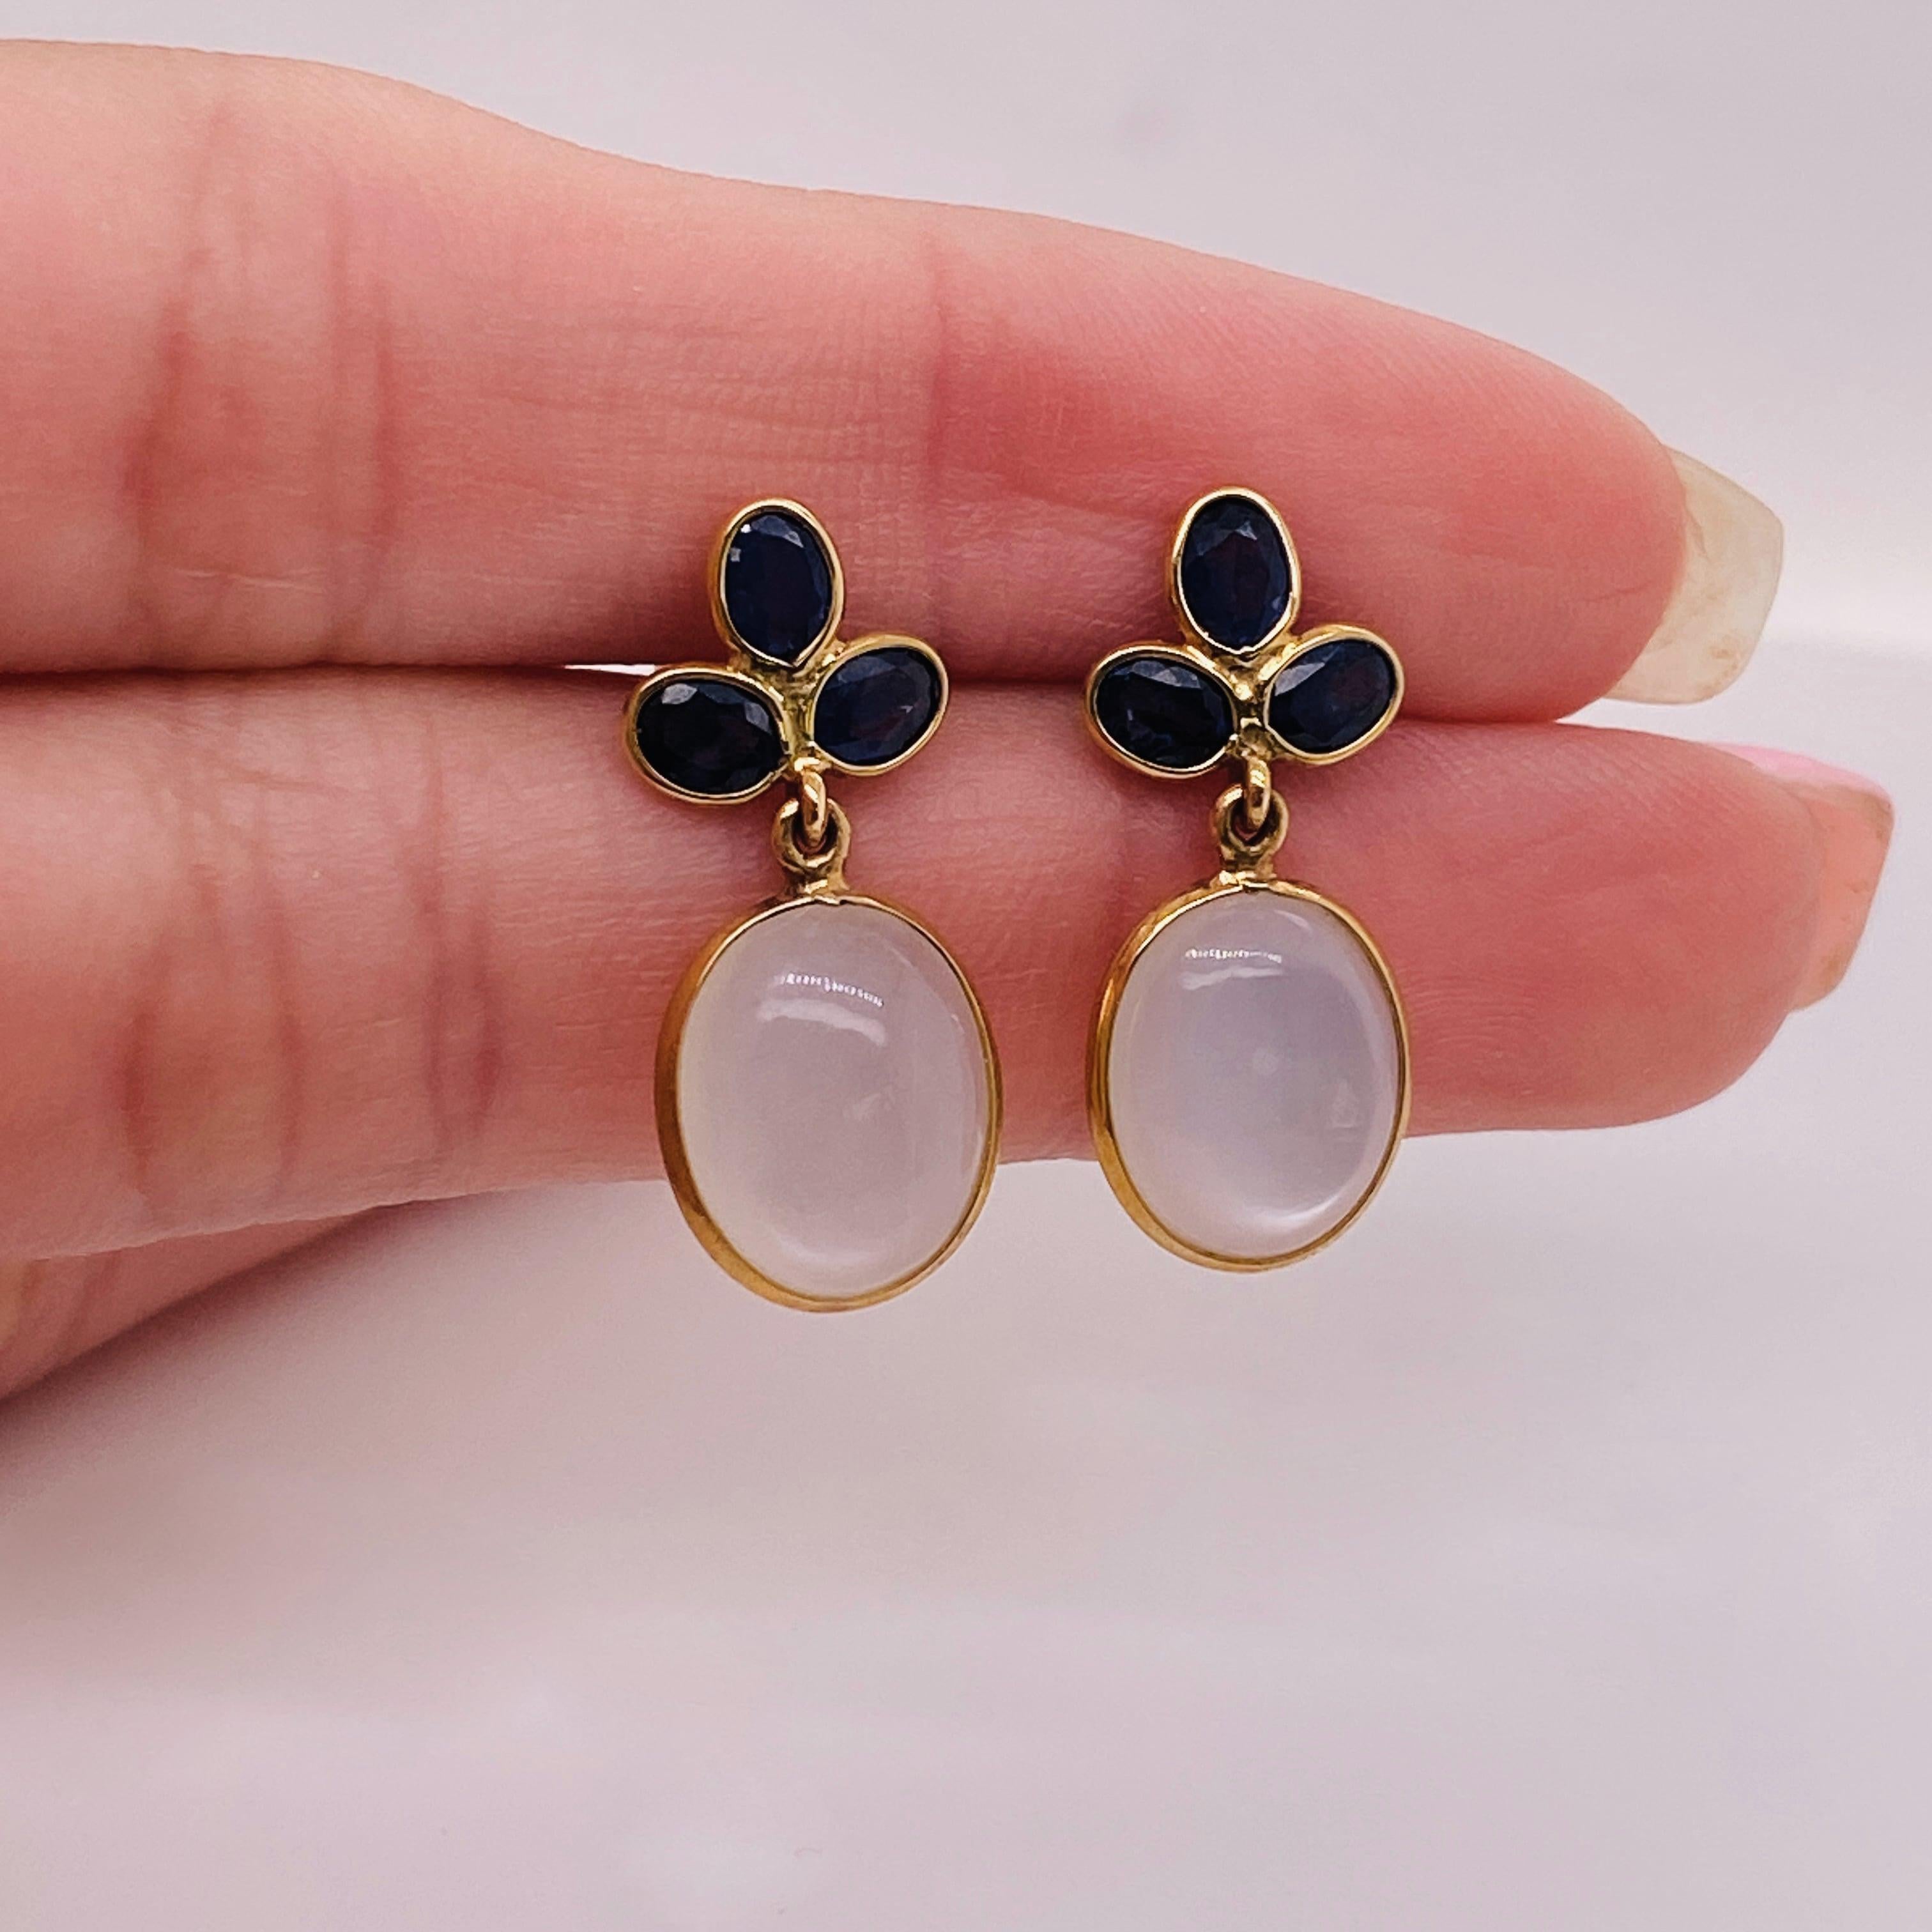 These beauties would be perfect for a wedding! The gorgeous shimmer to the moonstones (so hard to catch in photos!) are like the bright white shimmer of a wedding dress. The dainty blue sapphires make a beautiful cluster on the ear, suspending the